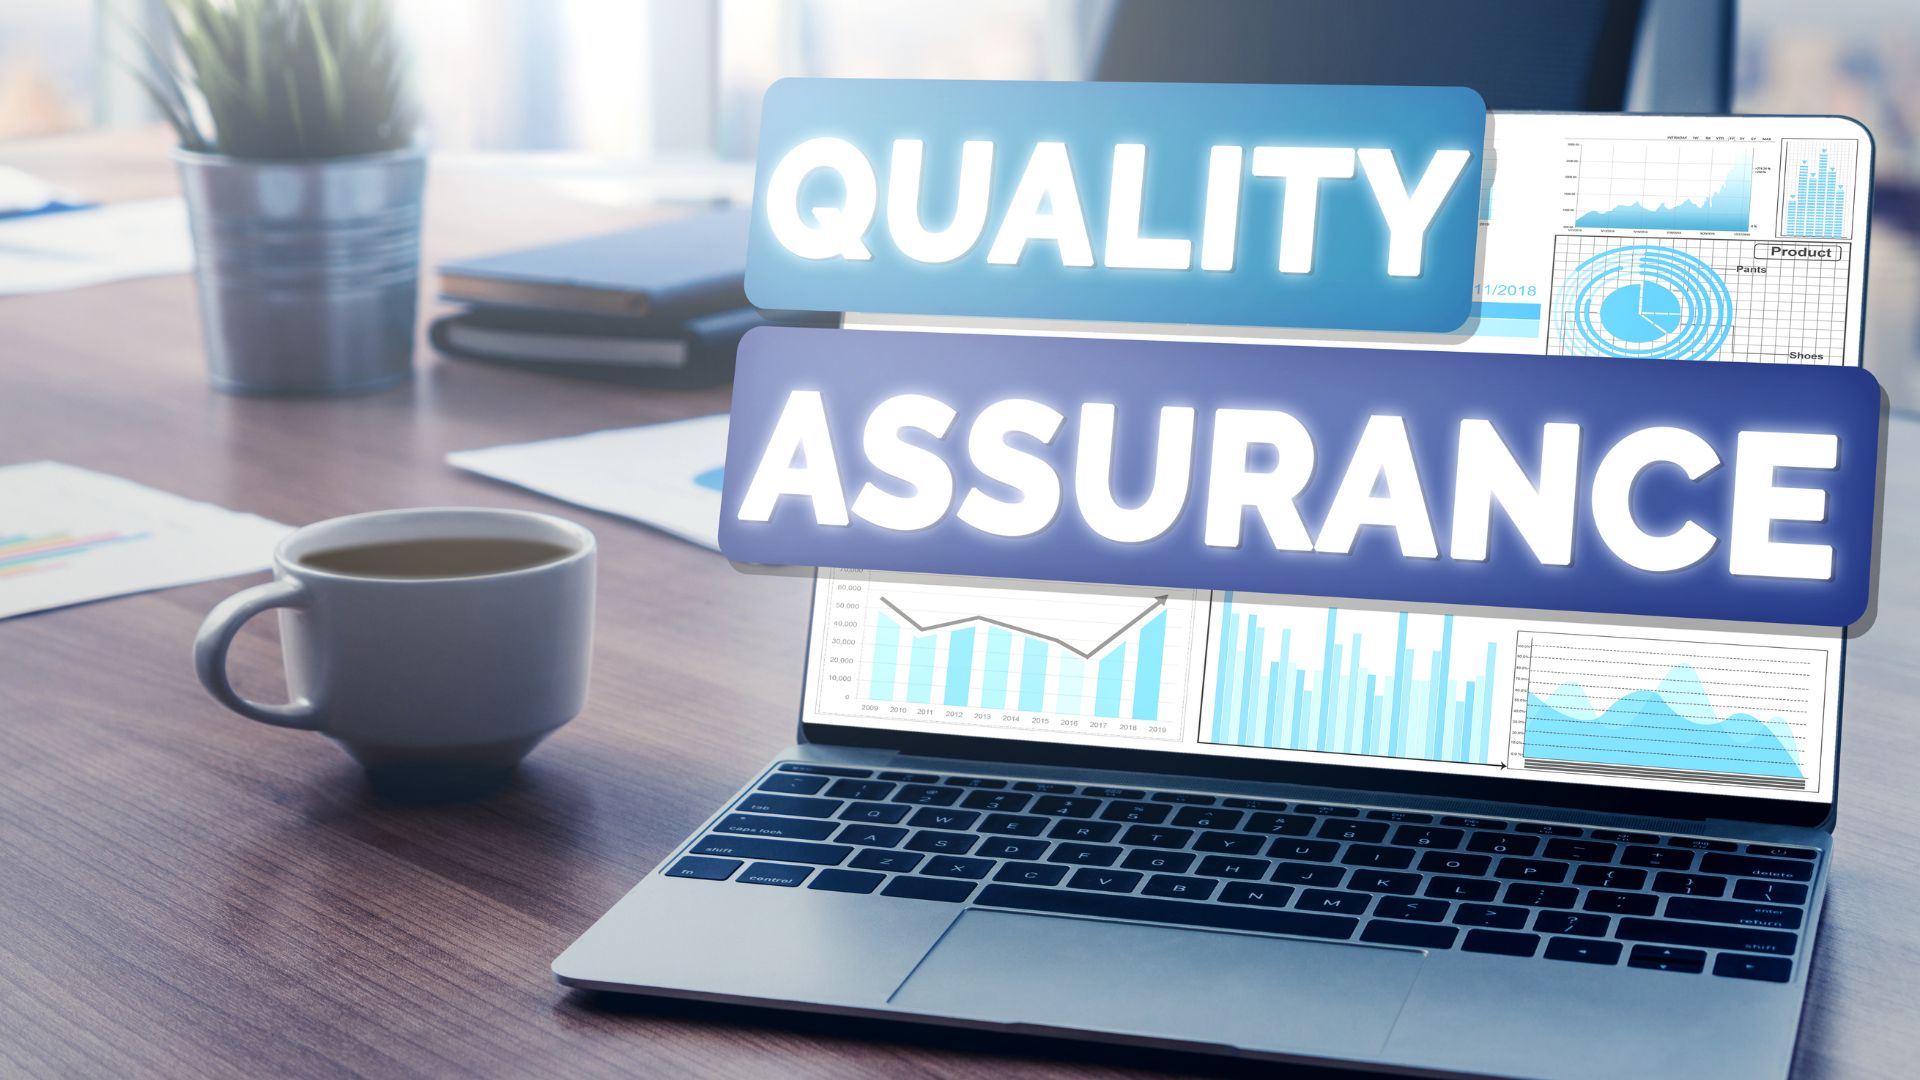 Maintaining Quality Assurance in a Remote Contact Center